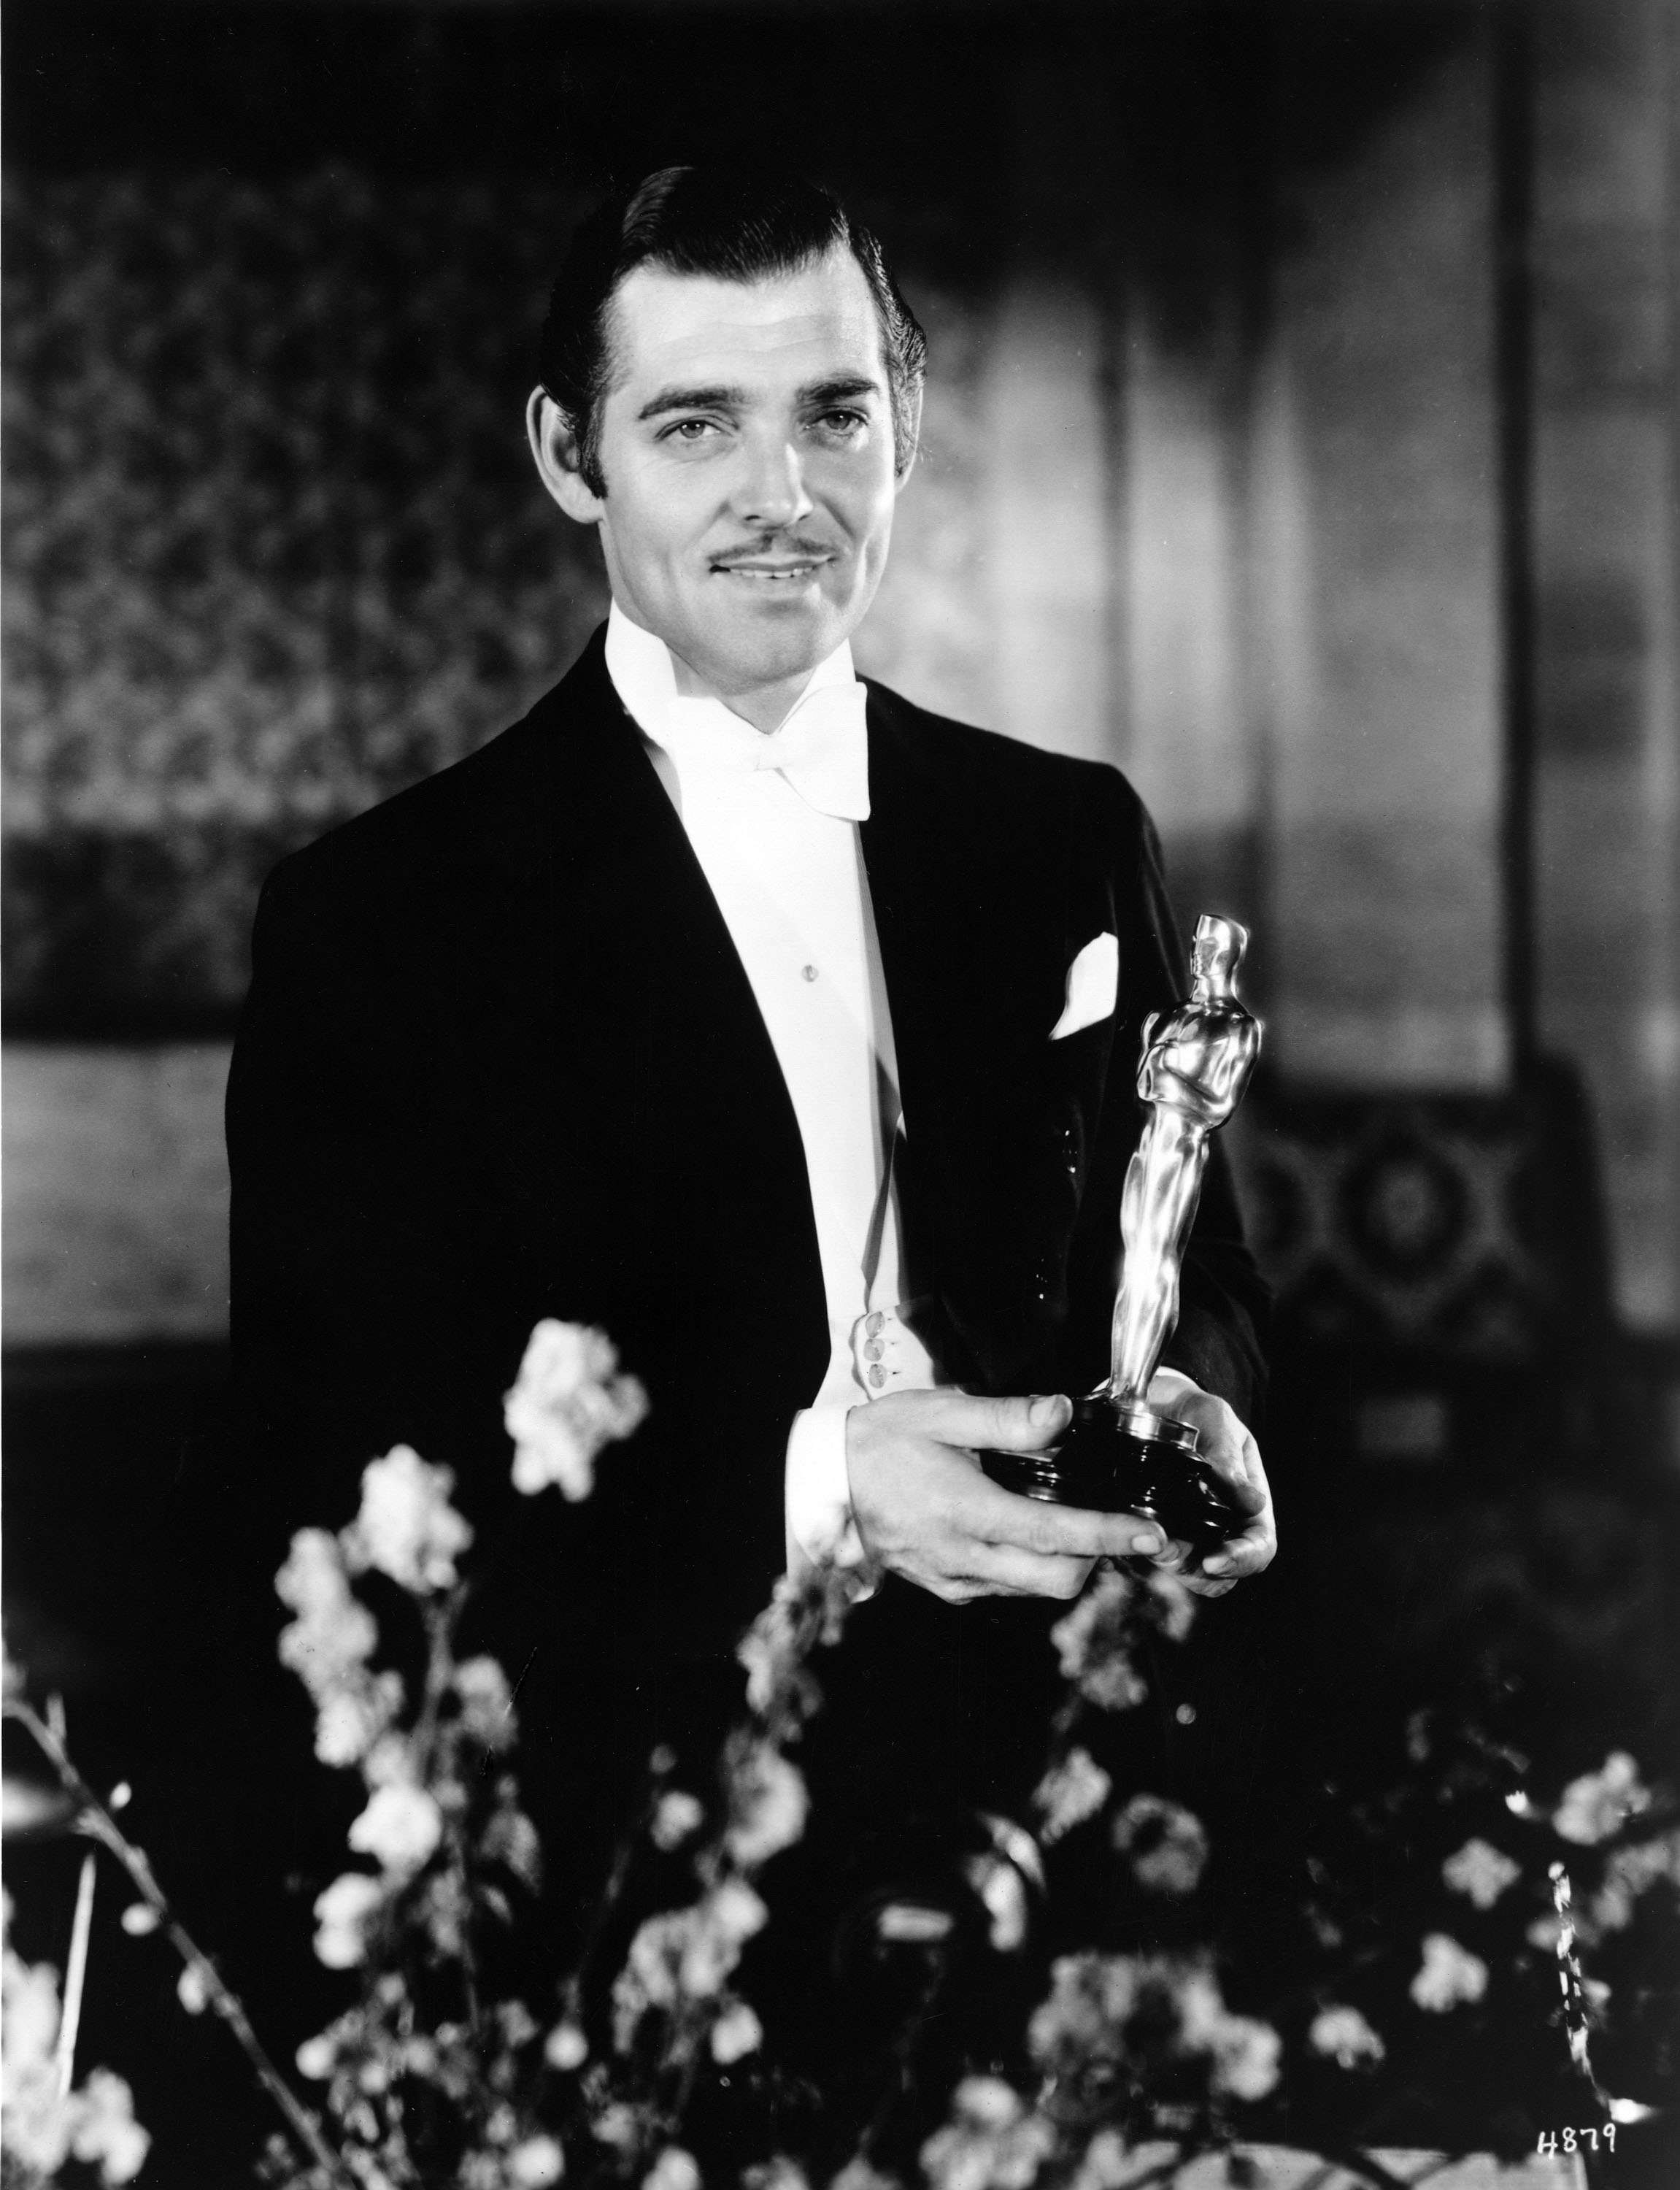 1935 | Oscars.org | Academy of Motion Picture Arts and Sciences2302 x 3000